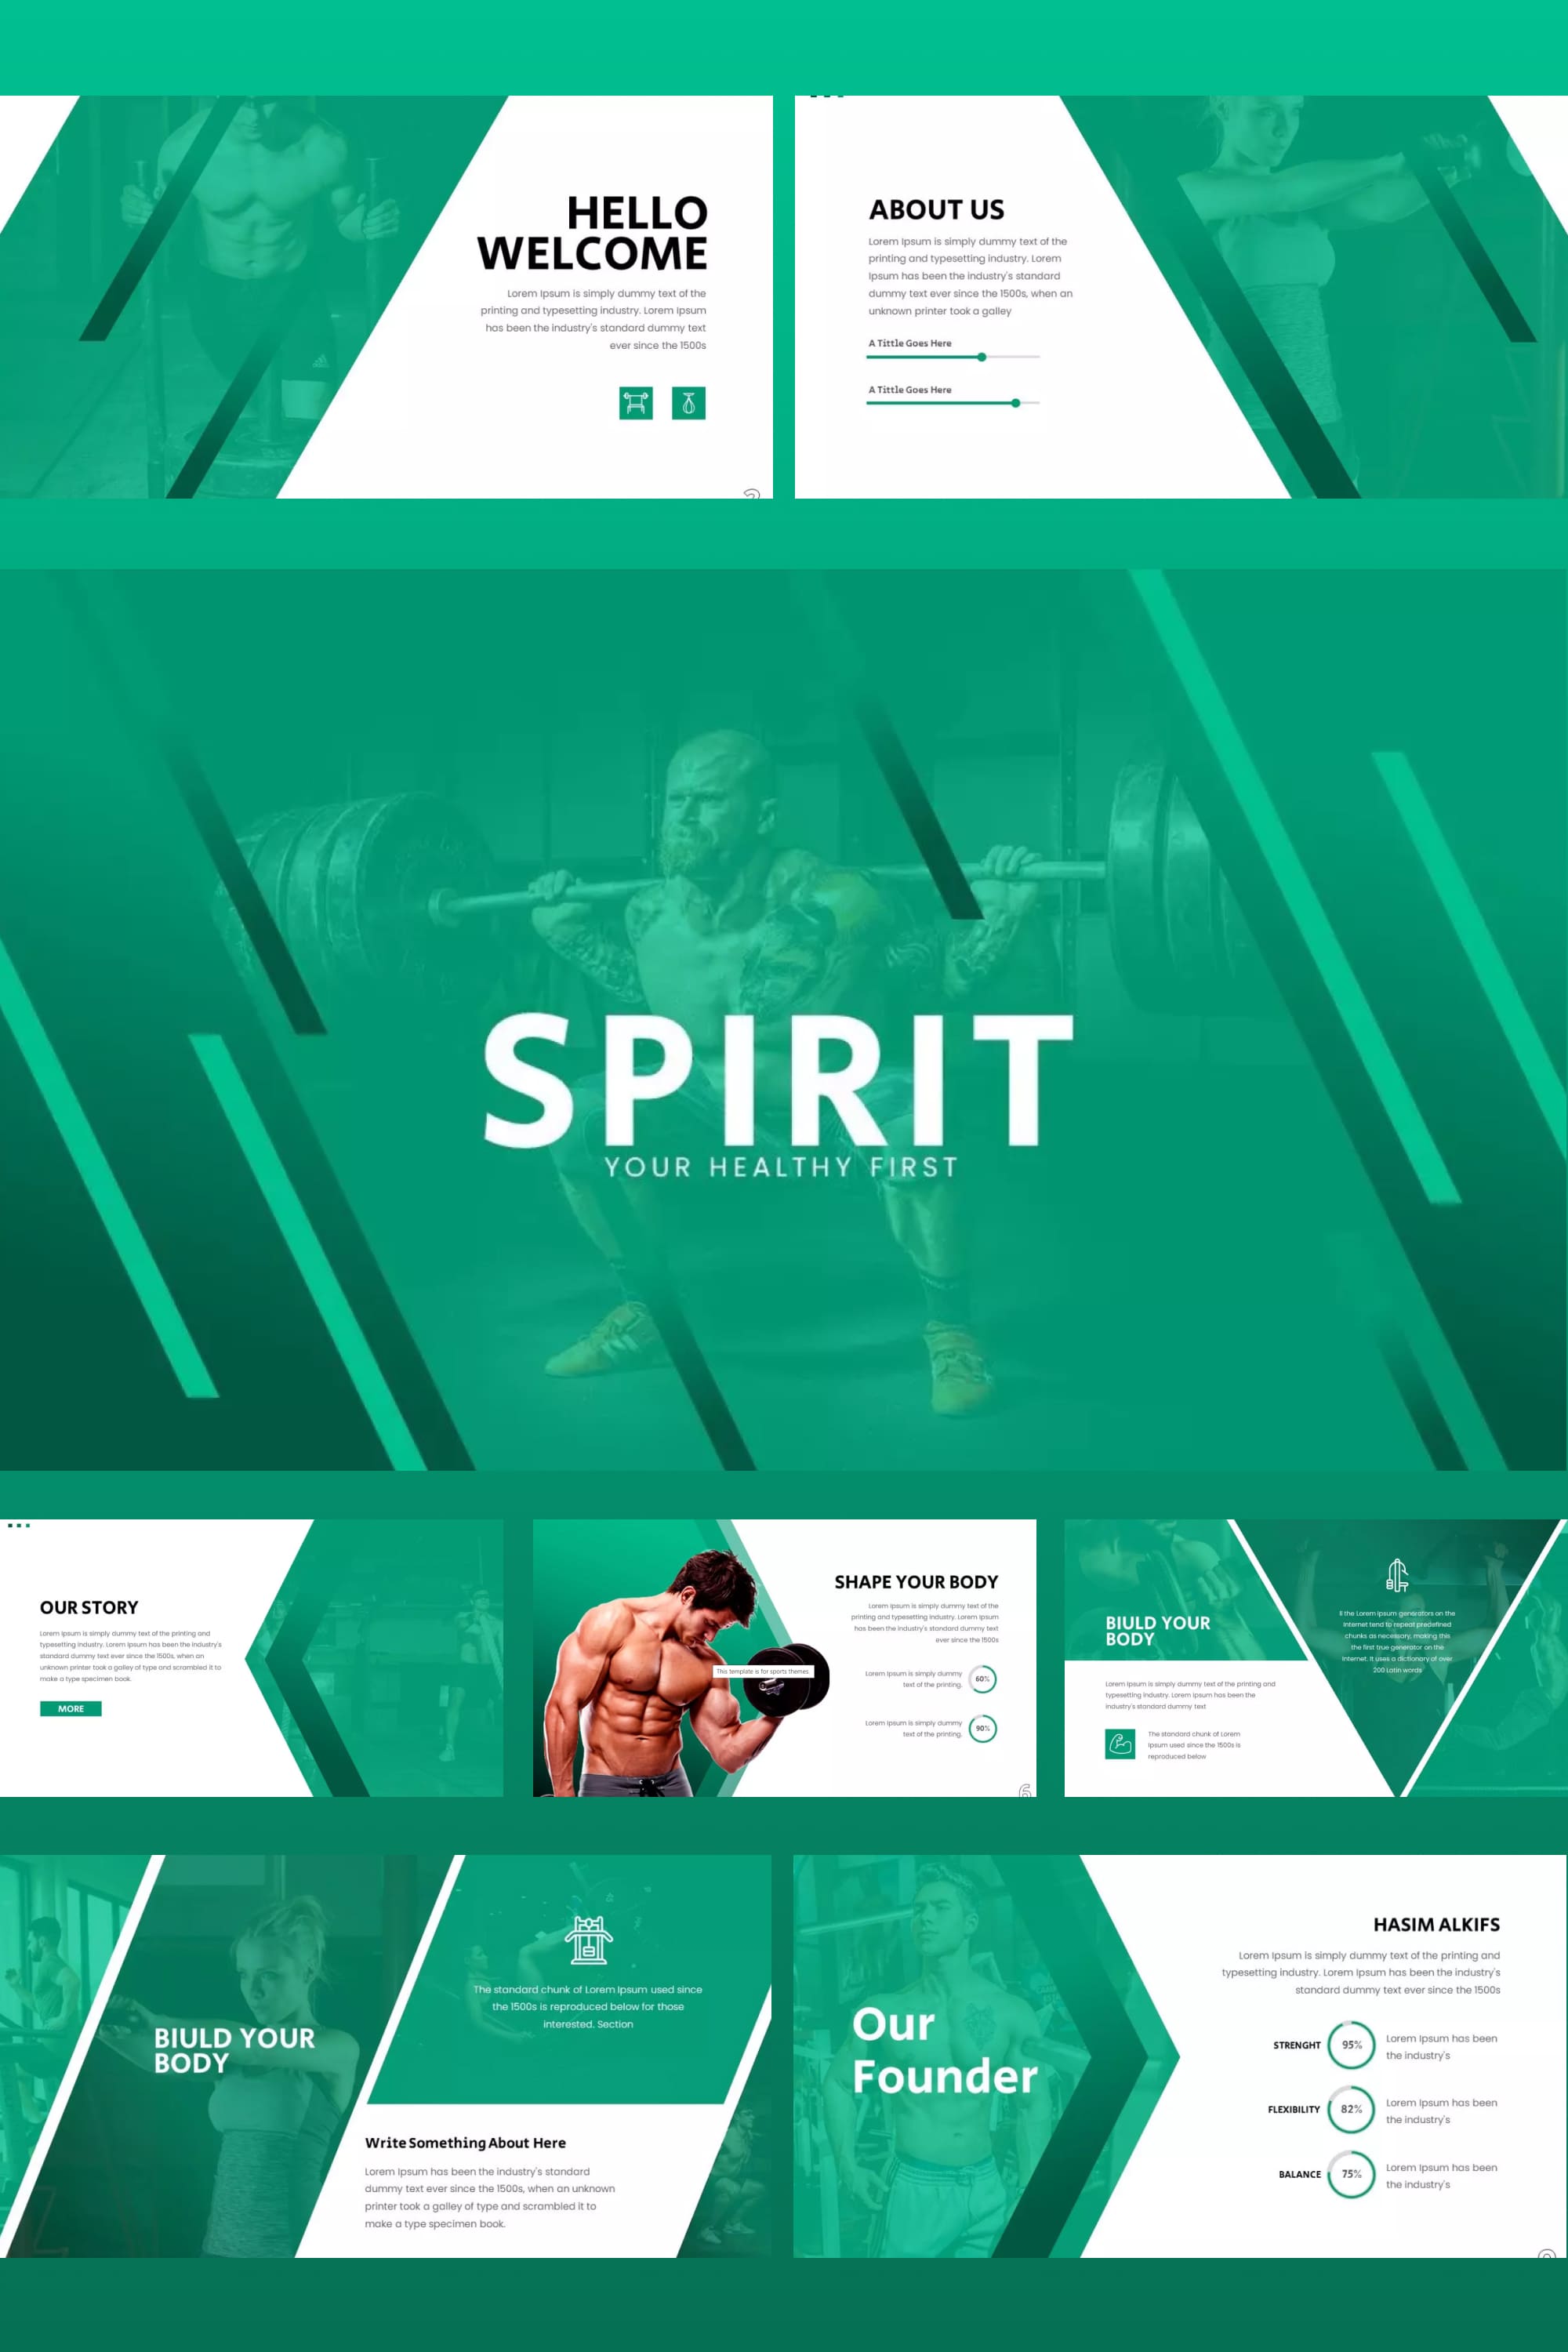 Screenshots of presentation pages in green for sports.